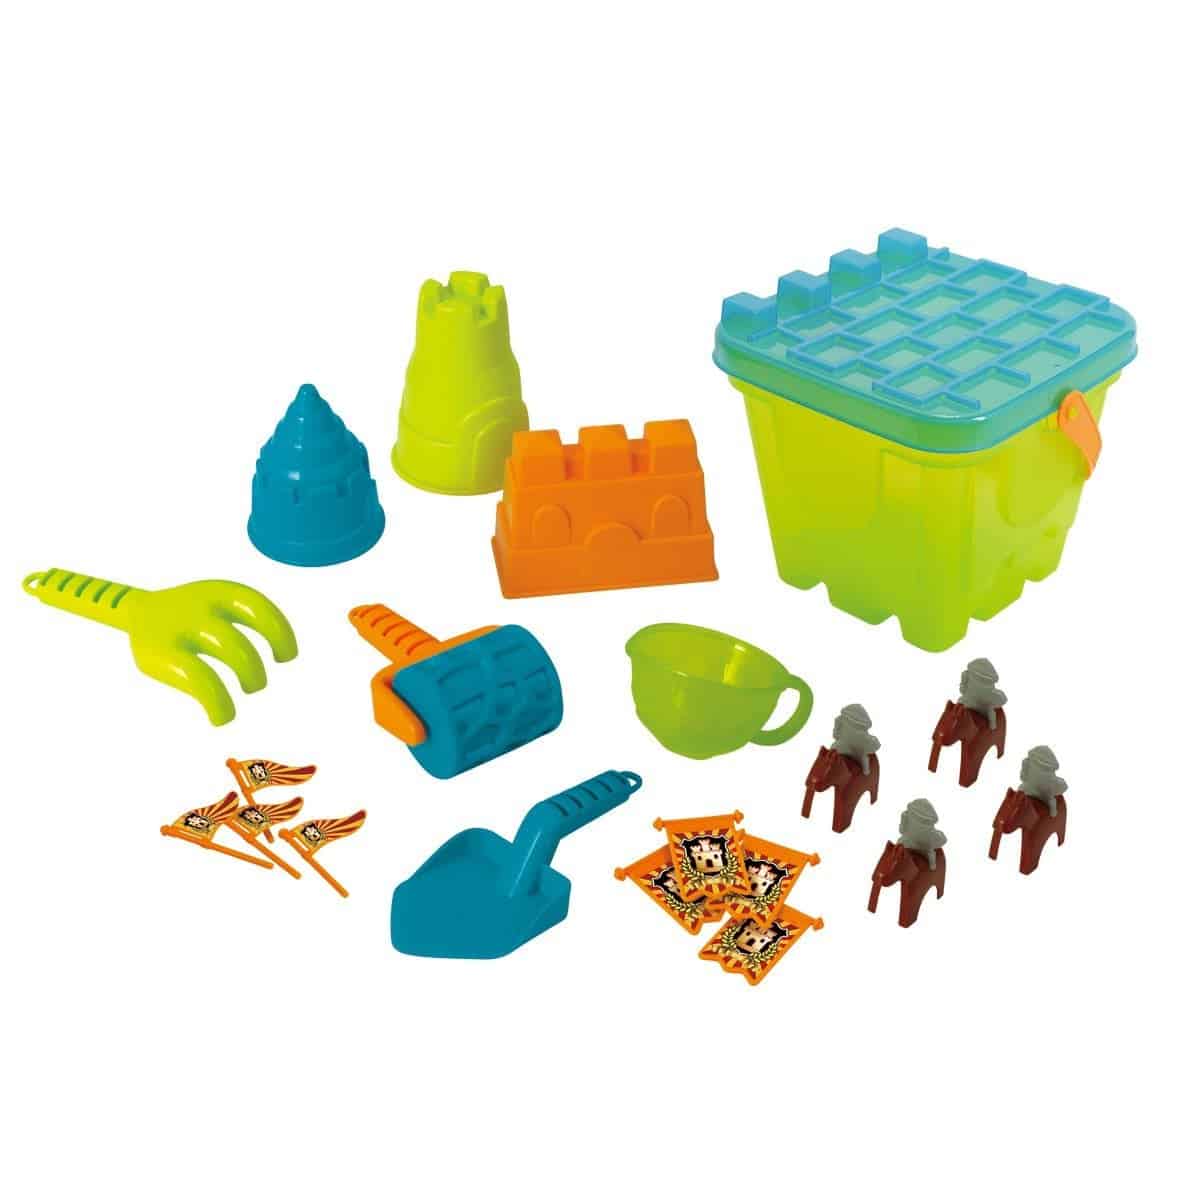 10+ Best Games and Toys for a Fun Day at the Beach: Deluxe Sand Castle Playset| www.thepinningmama.com